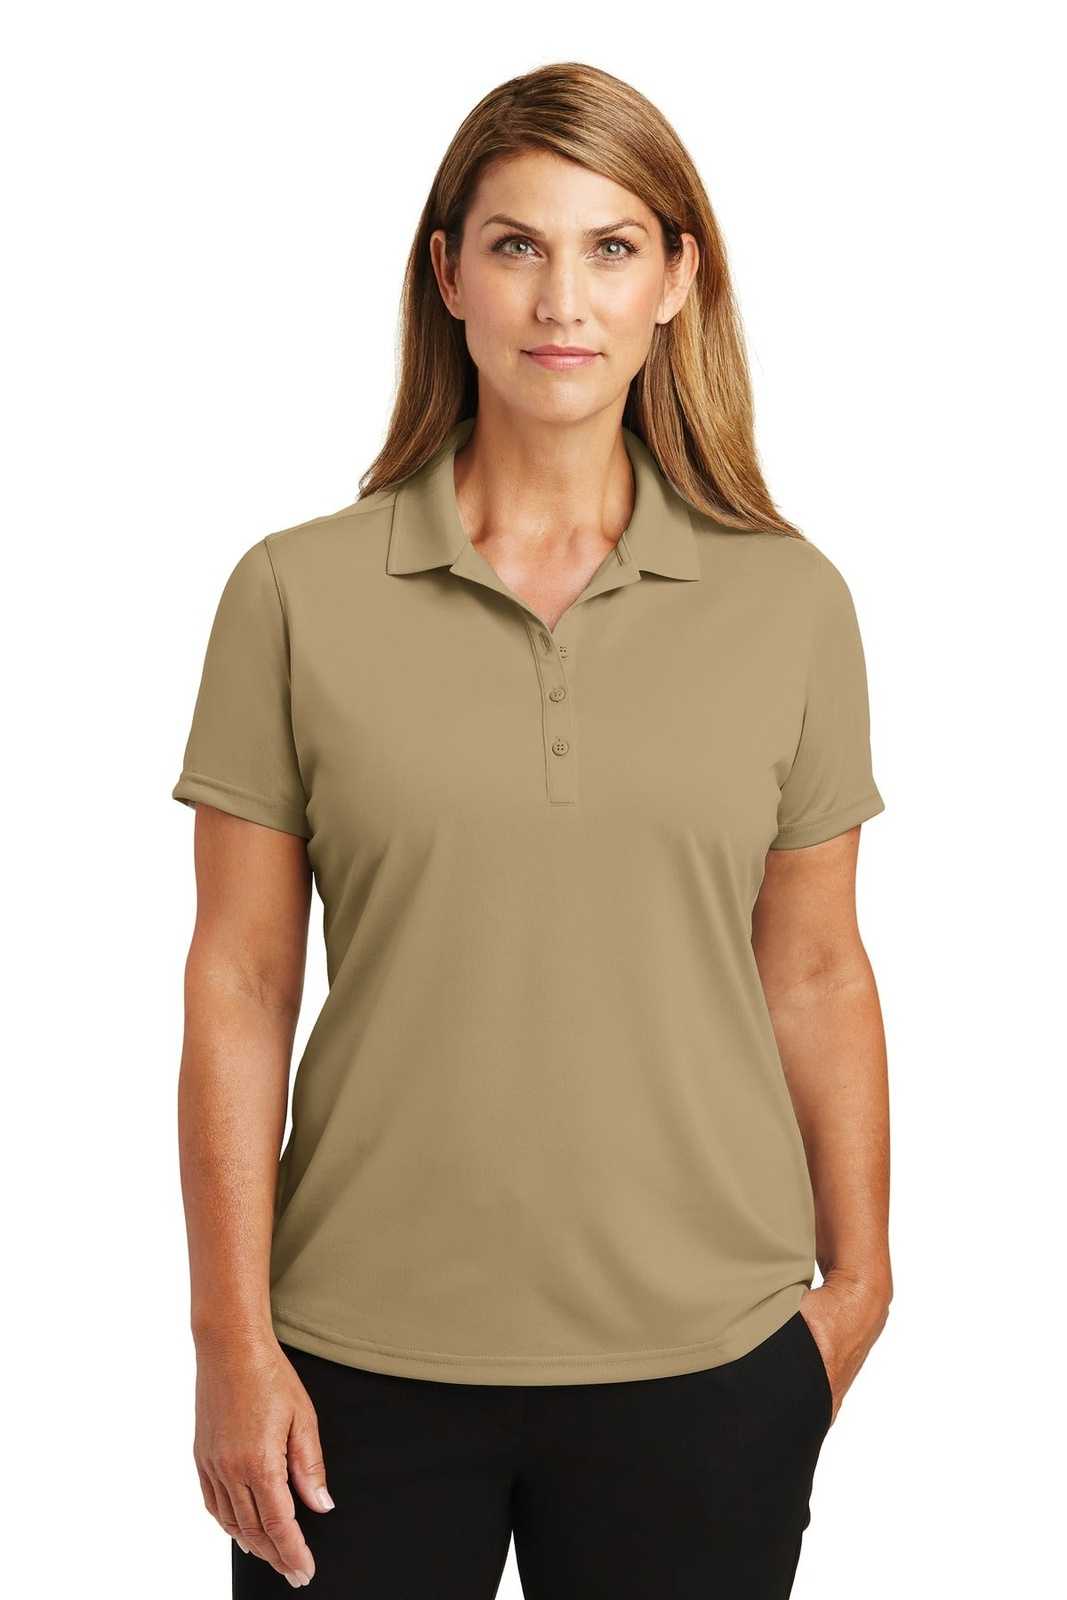 CornerStone CS419 Ladies Select Lightweight Snag-Proof Polo - Tan - HIT a Double - 1